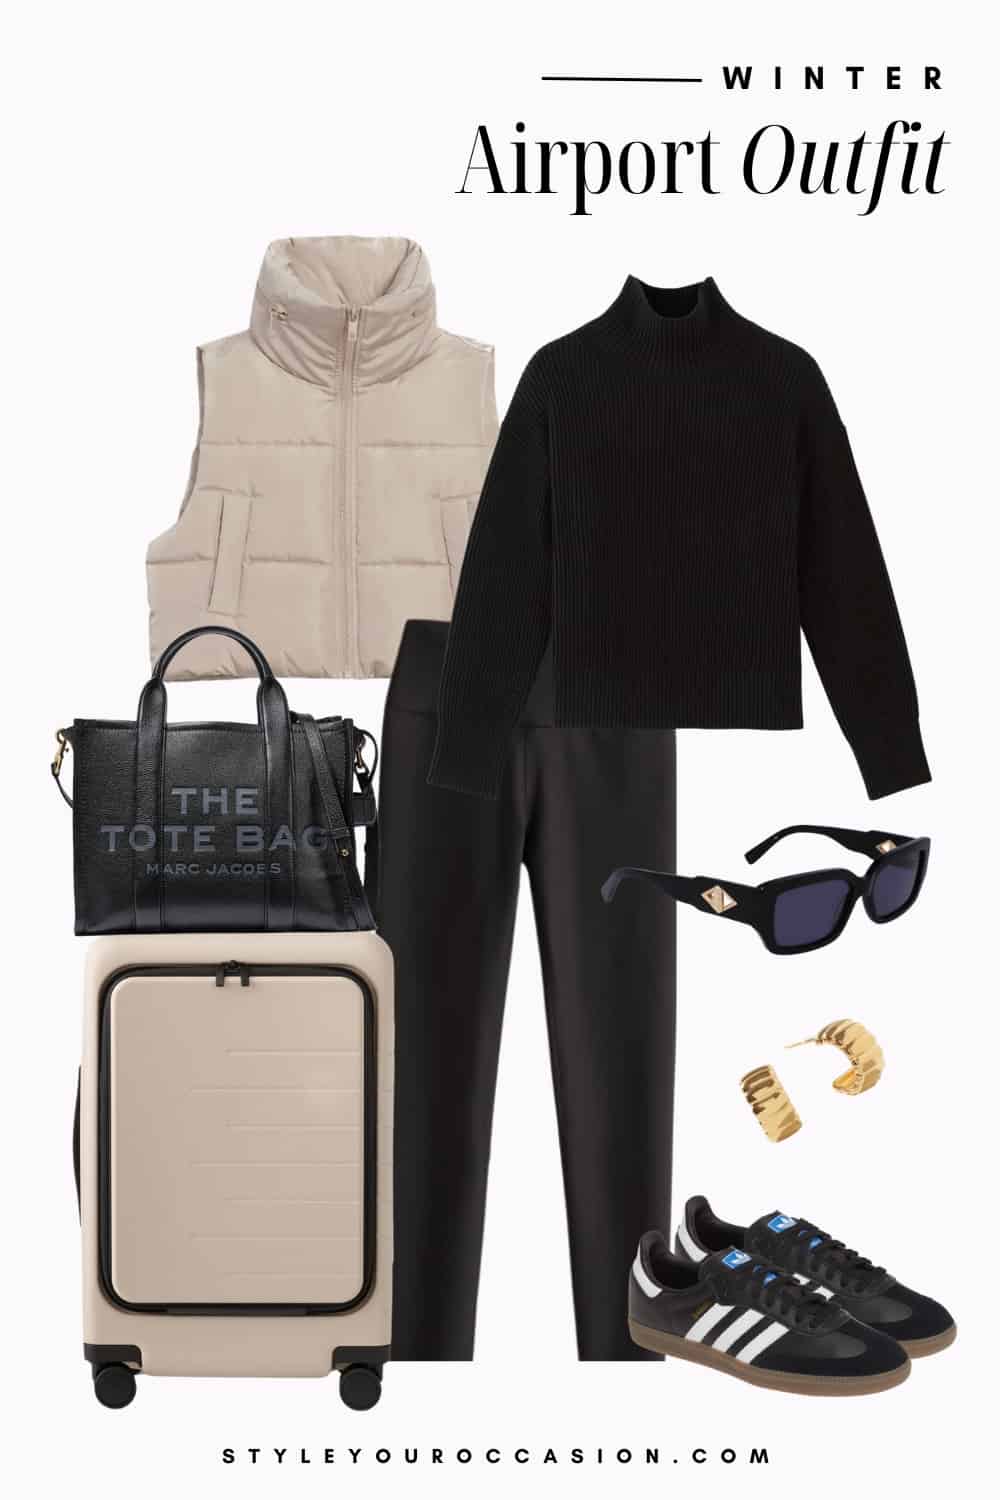 Graphic of a winter airport outfit including a black sweater, black leggings, black sneakers and a tan puffer vest.